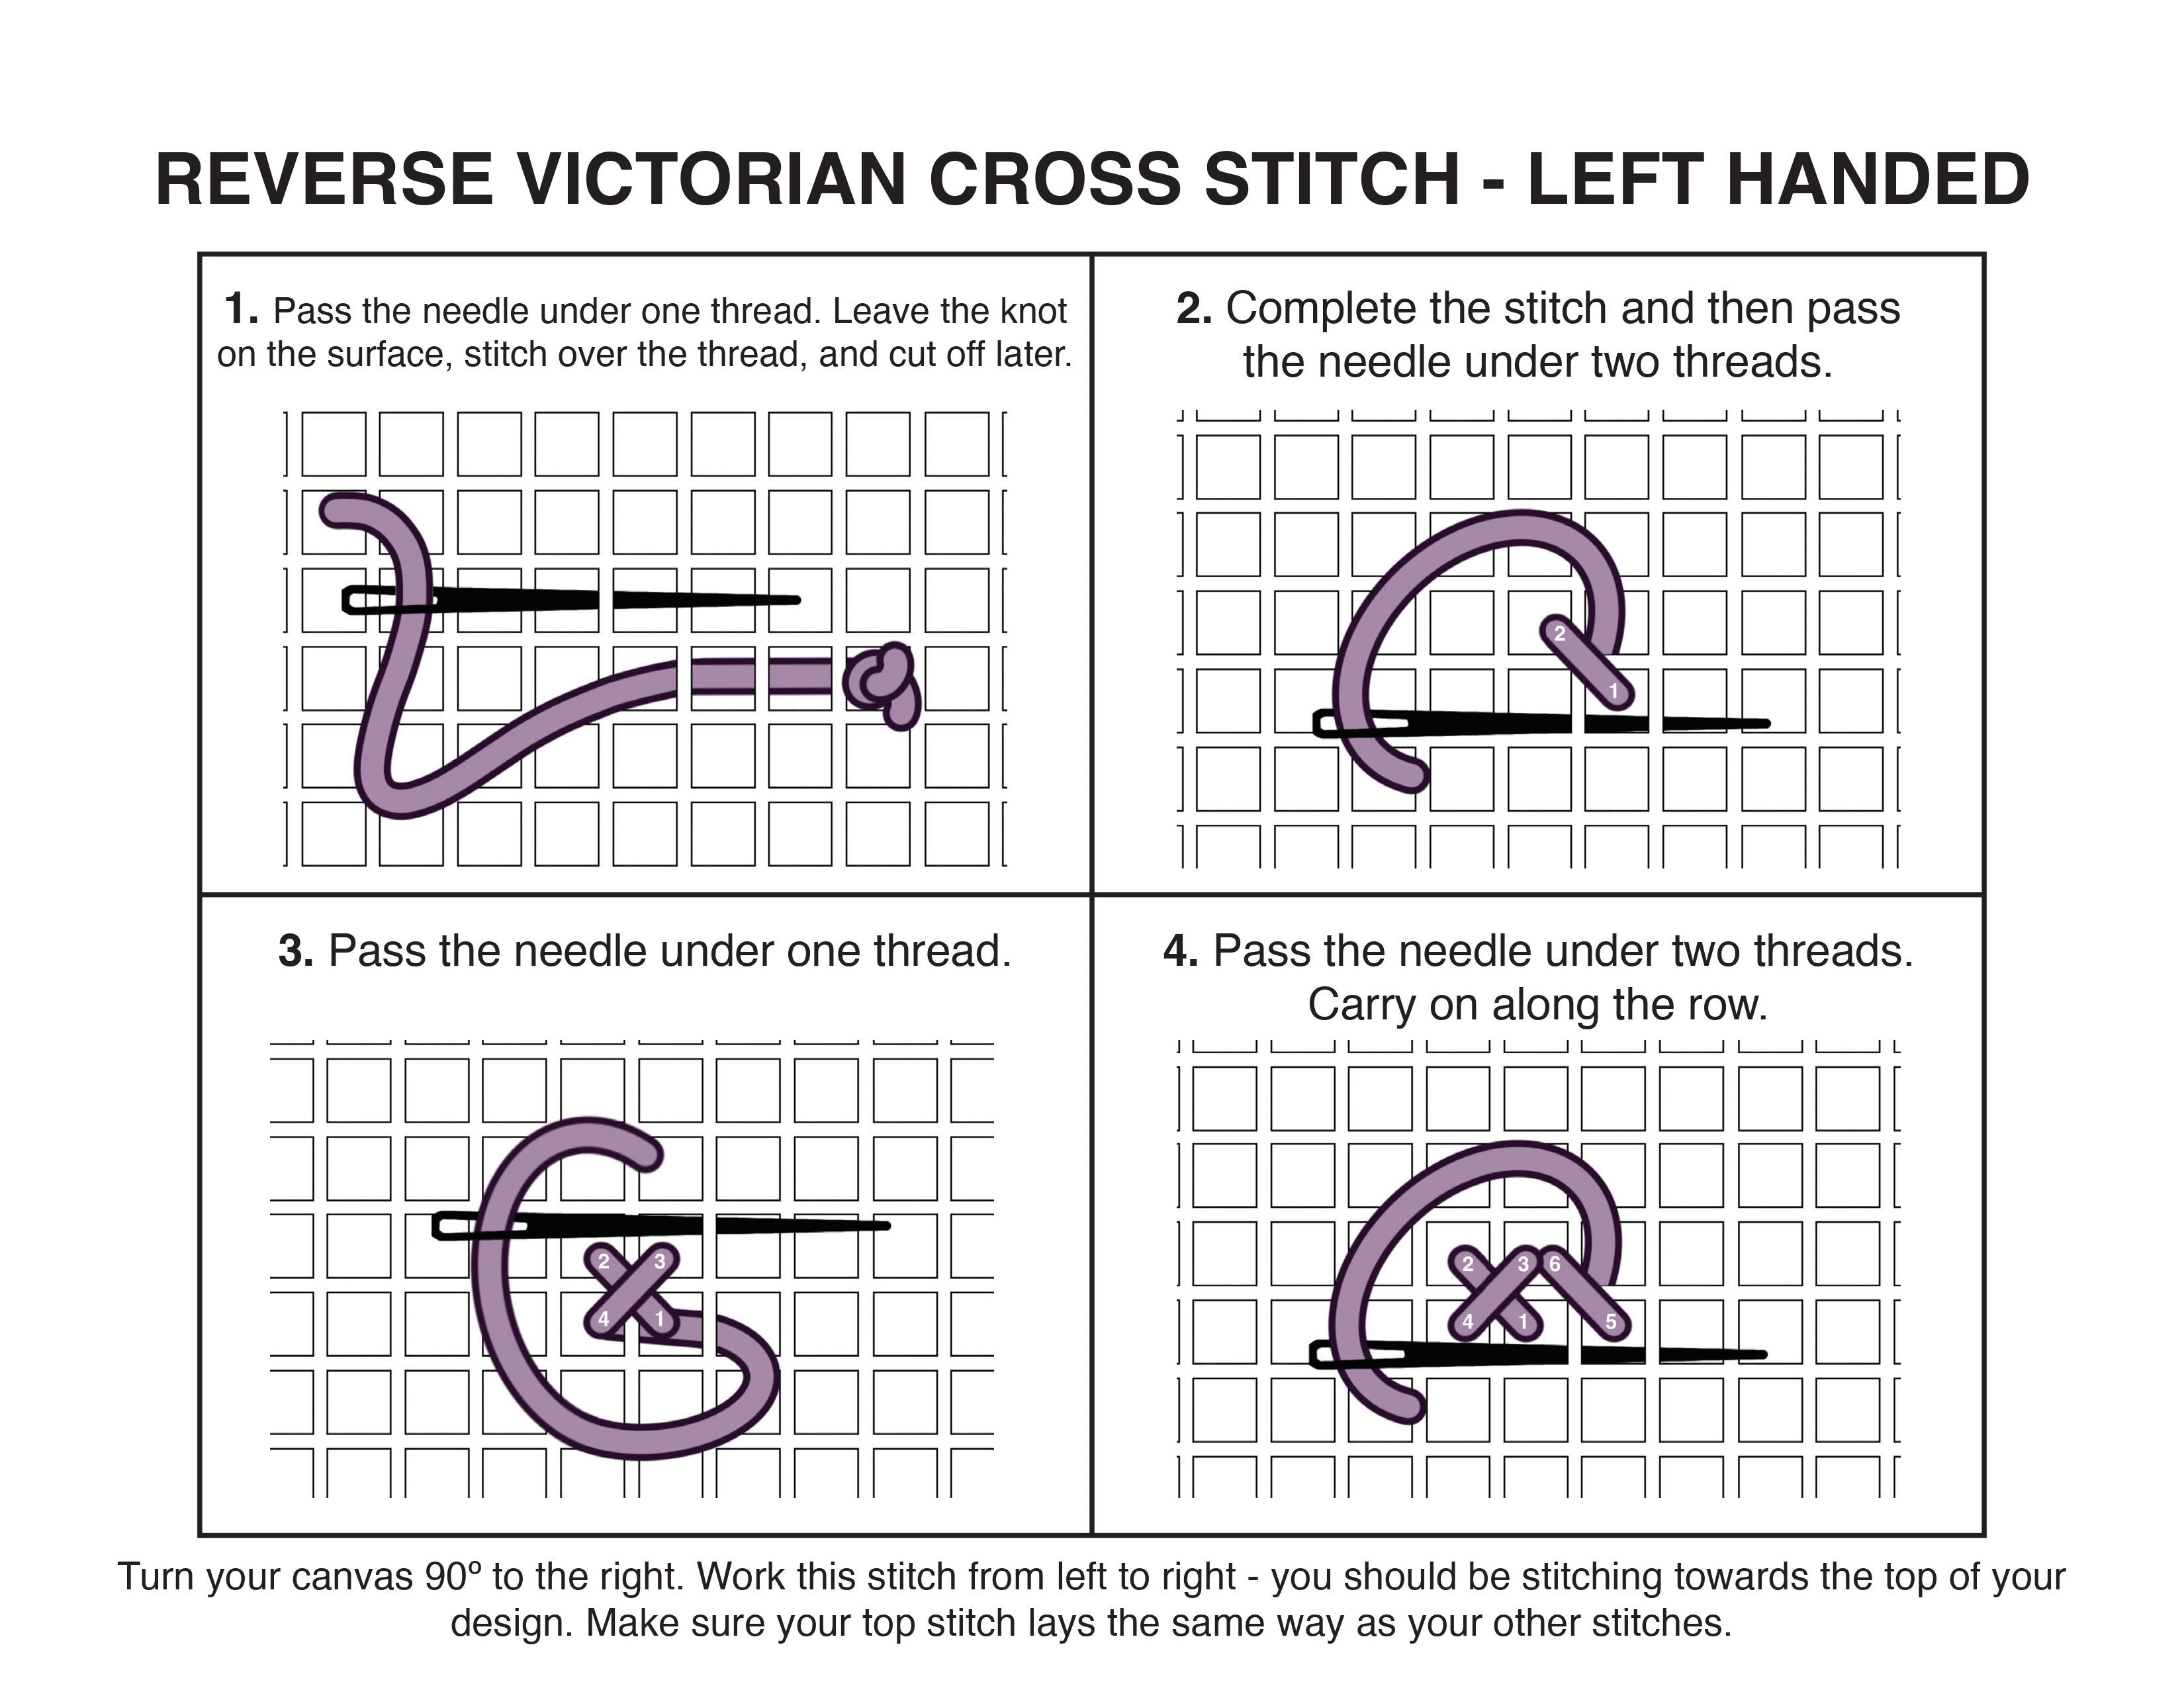 Reverse Victorian Cross Stitch left hand instructions with diagram